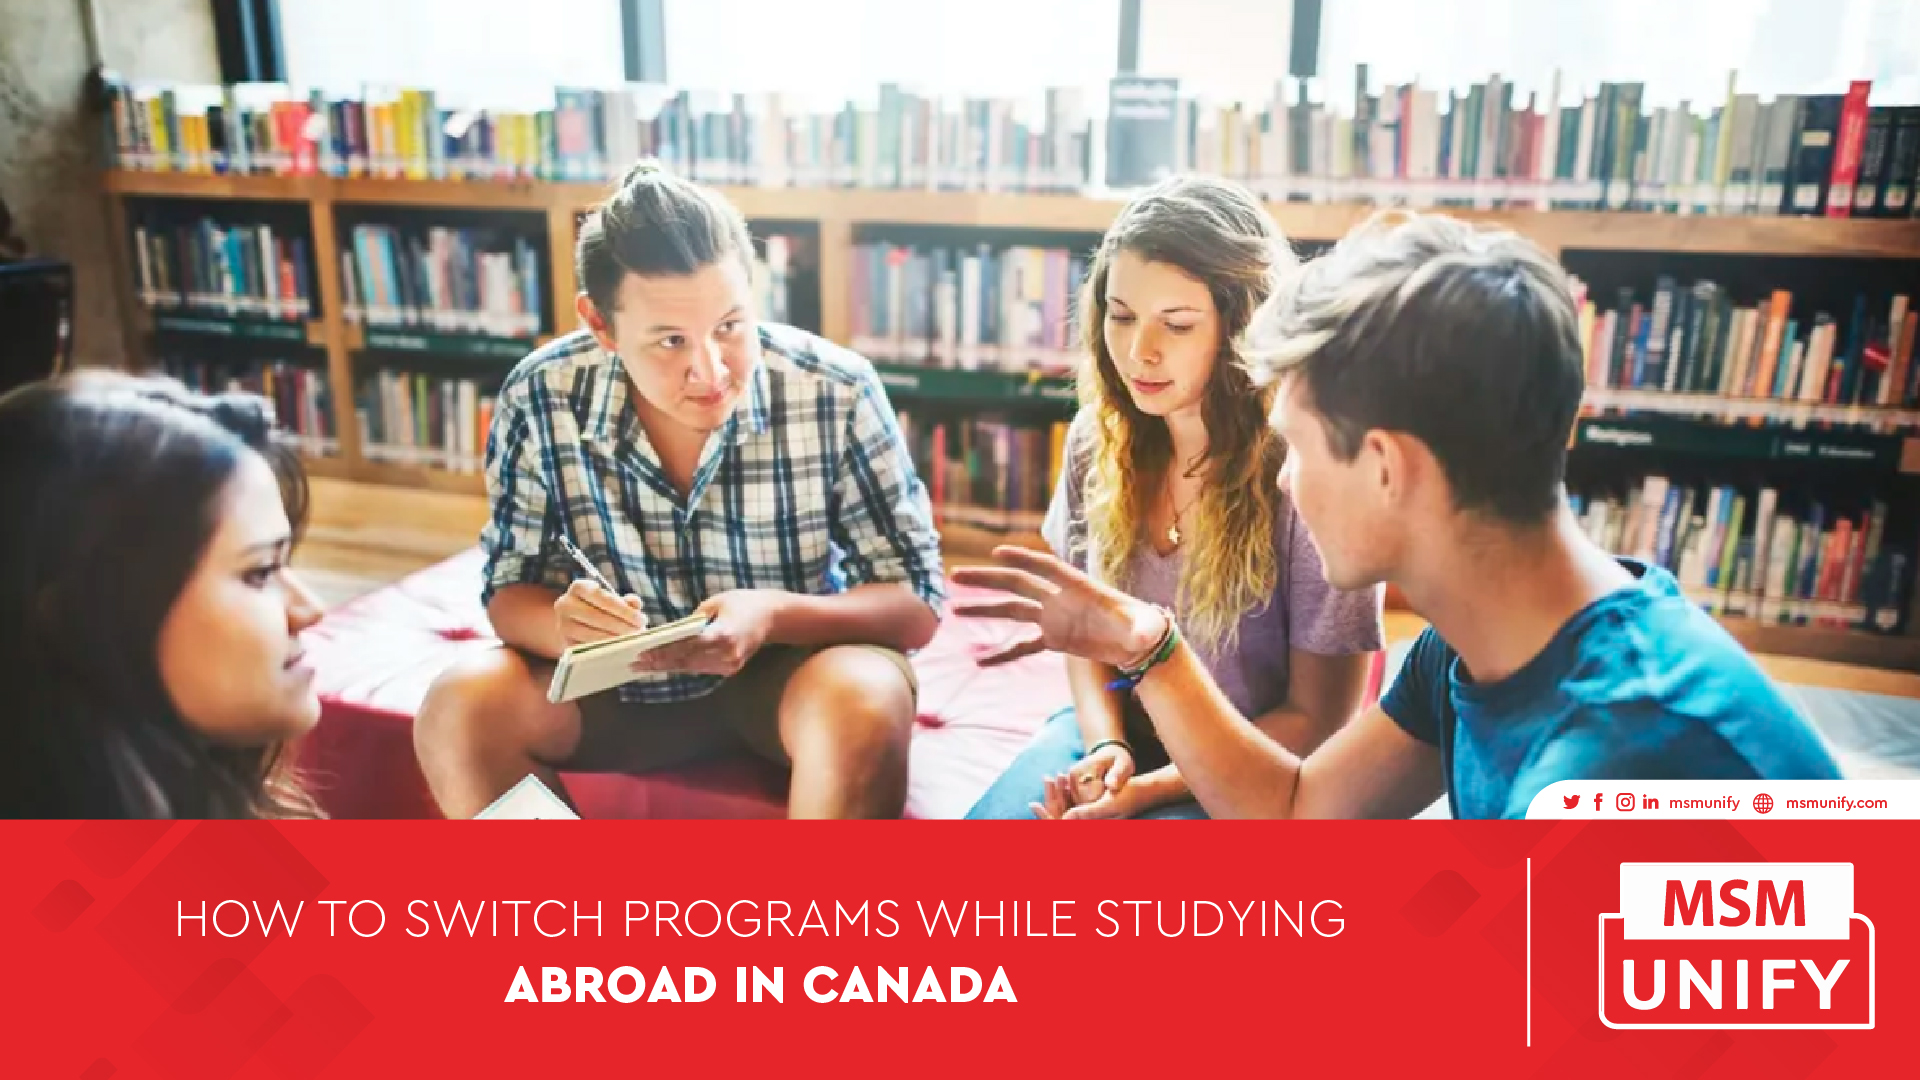 How to Switch Programs While Studying in Canada